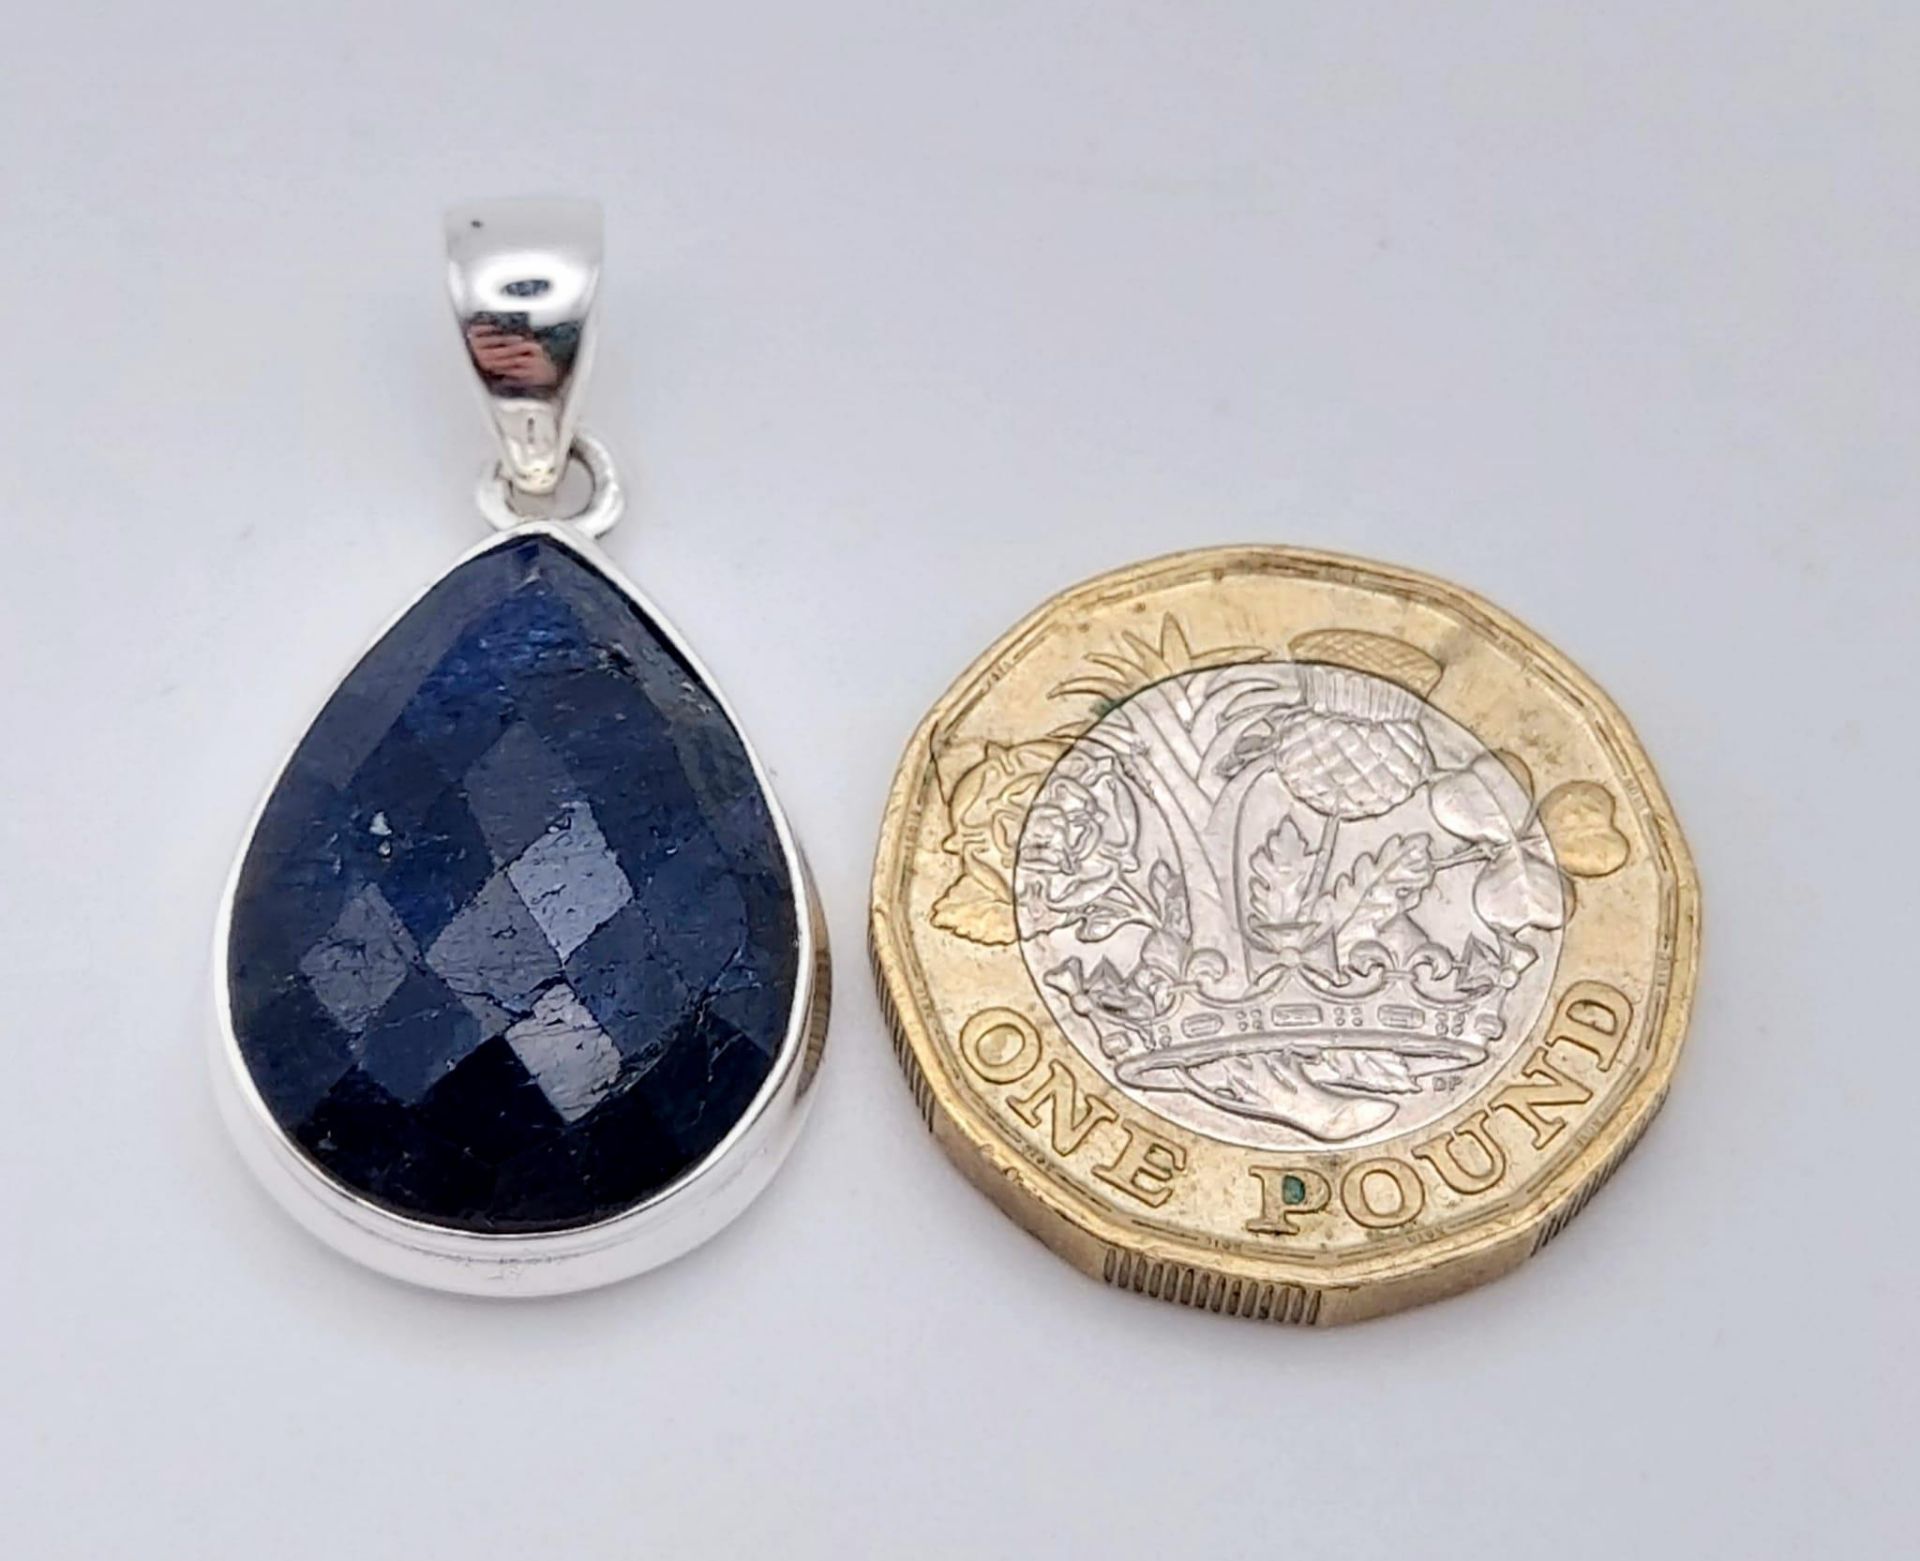 925 Silver Pendant with Matching Ring. Total Weight 14.18grams. Ring Size M. - Image 7 of 7